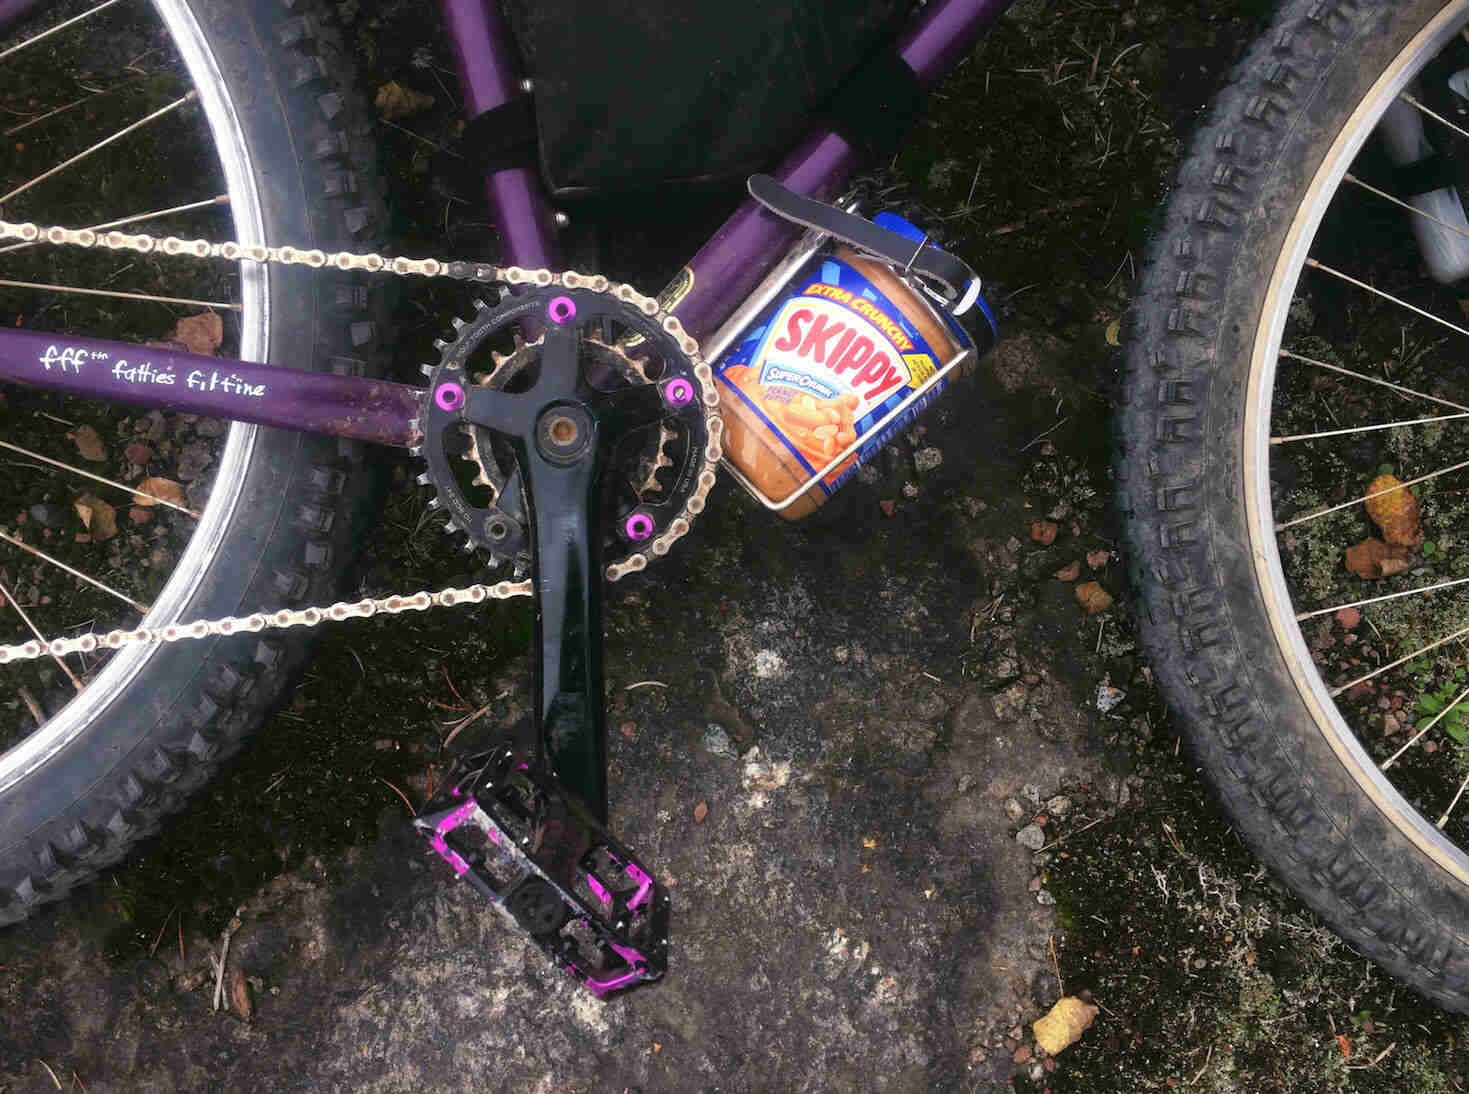 Downward, right side close up view of a Purple Surly bike with a jar of peanut butter in the water bottle cage